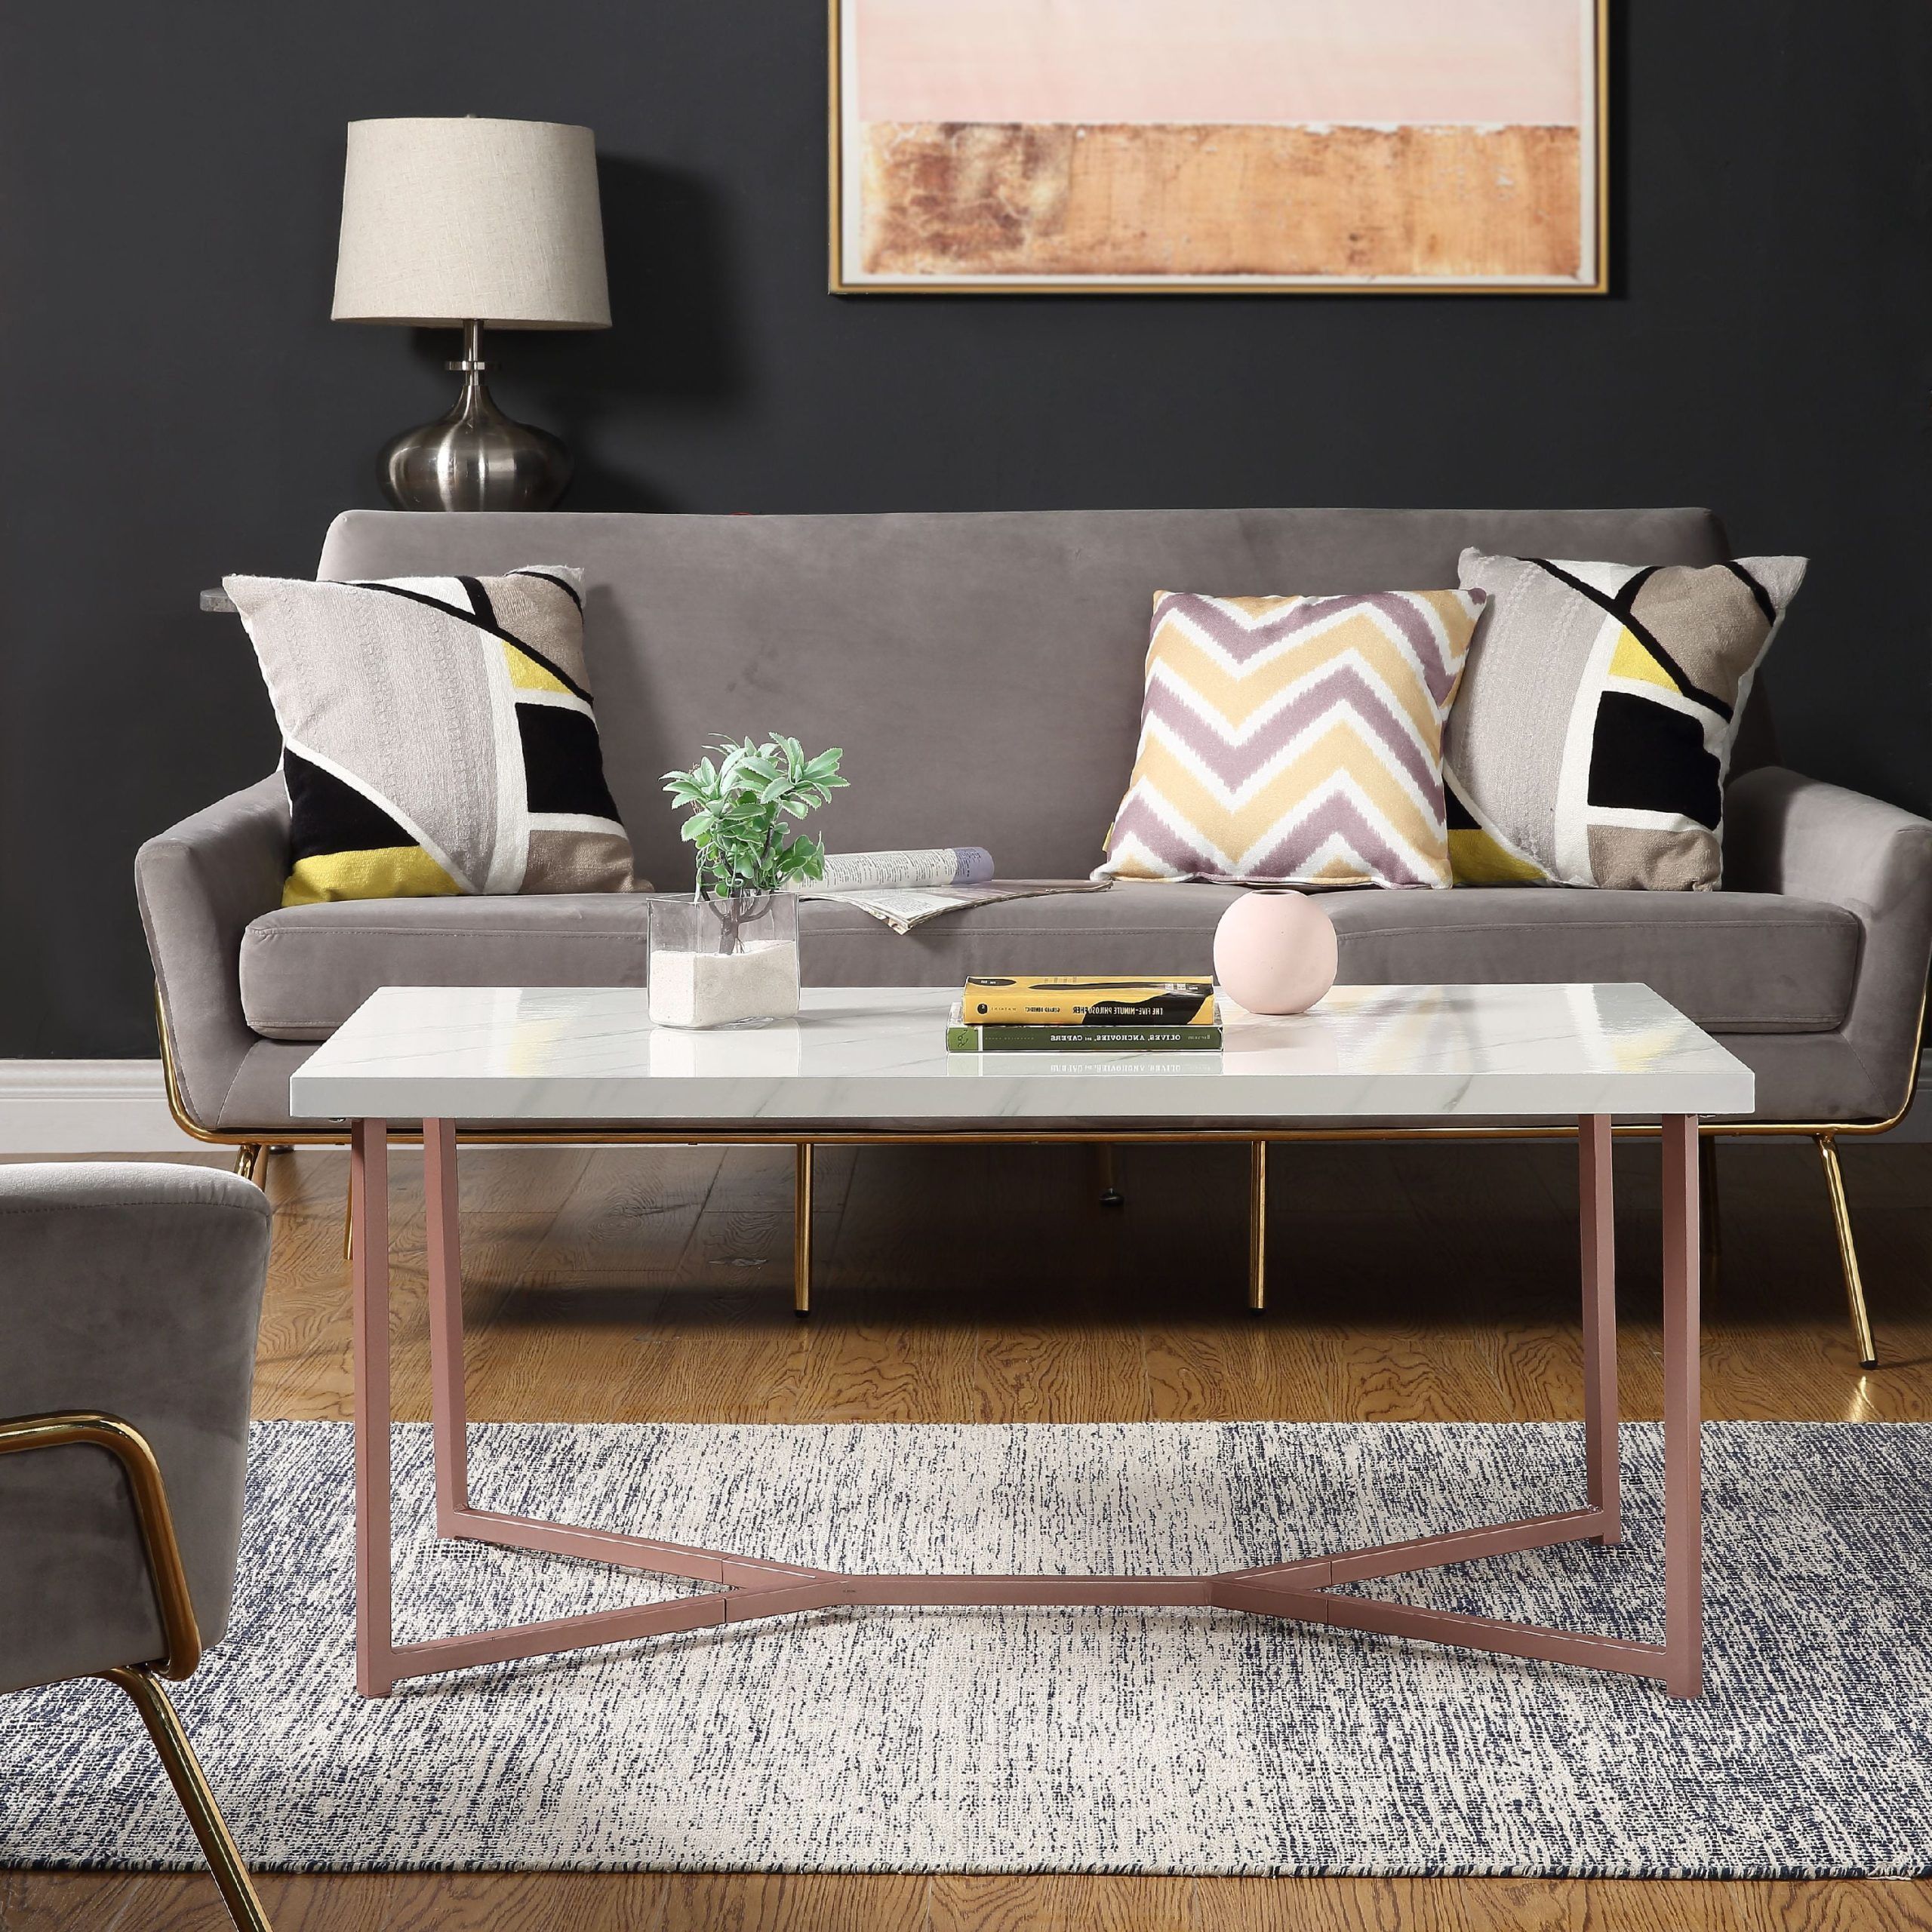 Harper&bright Designs Living Room Mid Century Modern Rectangle Wooden Inside 2019 Mid Century Modern Coffee Tables (View 7 of 15)